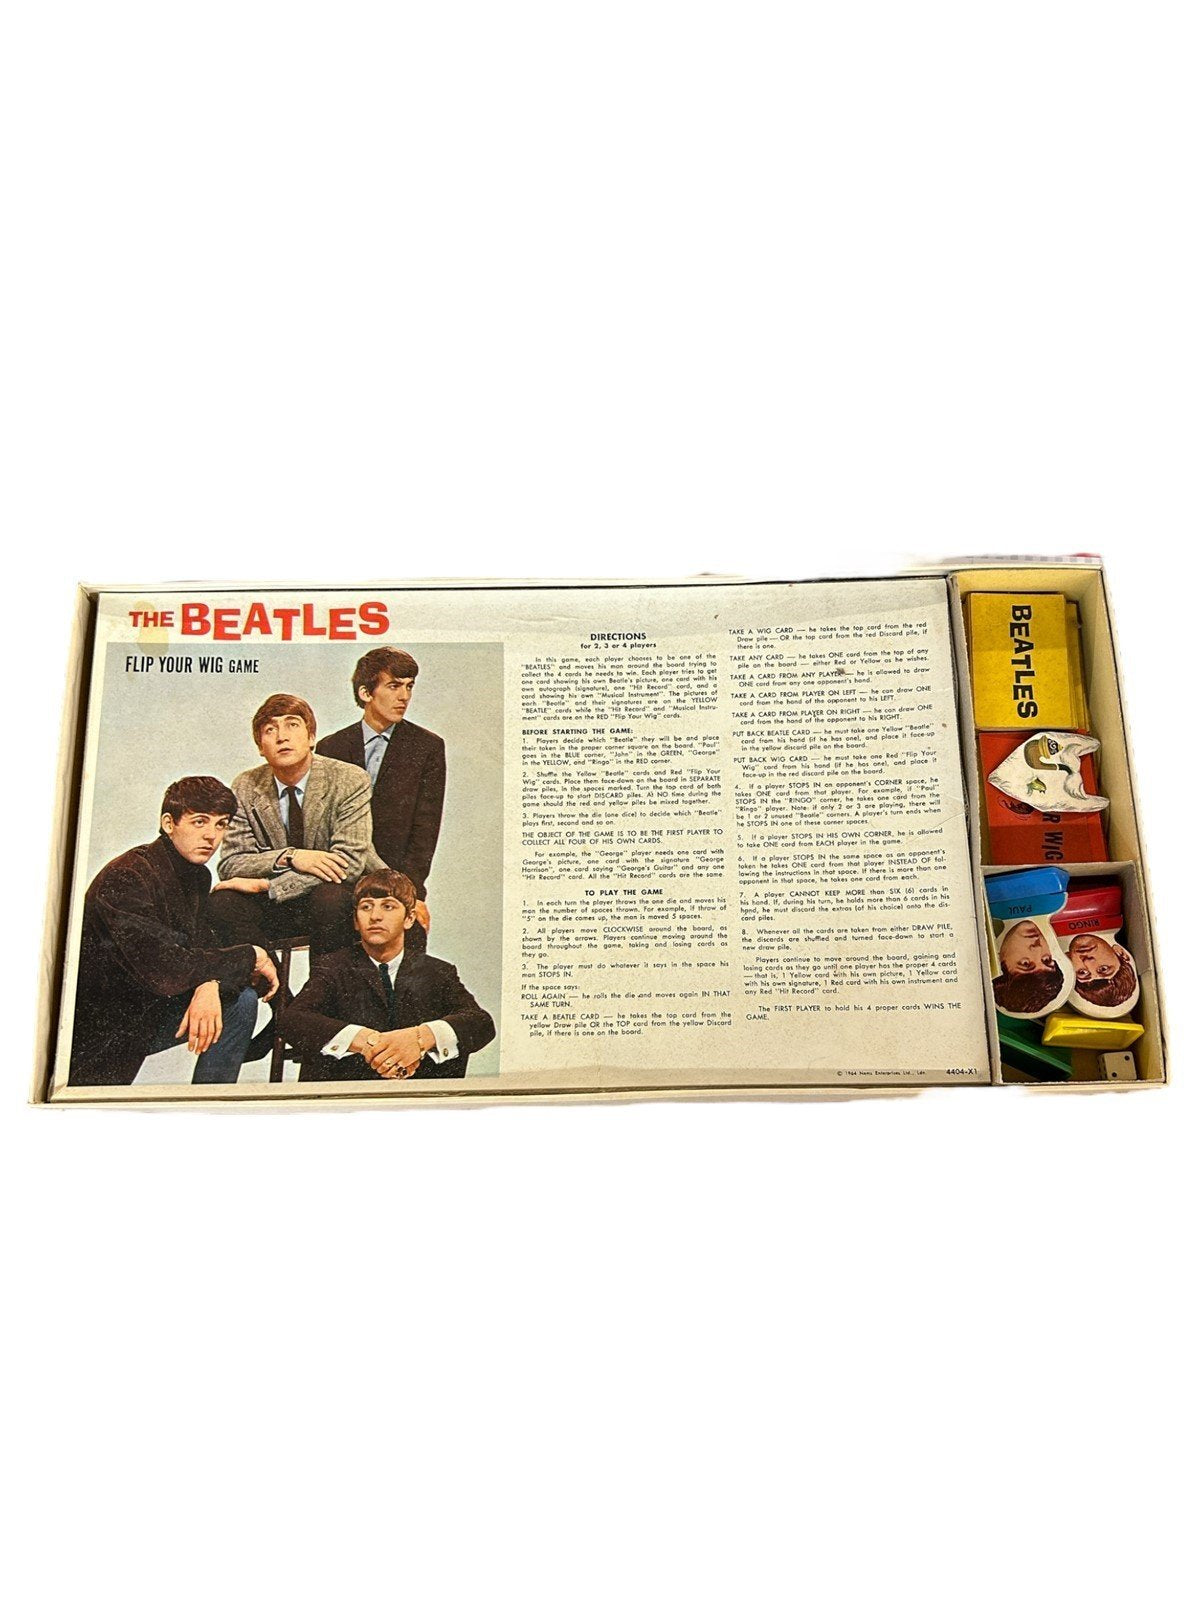 The Beatles Flip Your Wig Game Board Vintage Music 4 Player Original Box